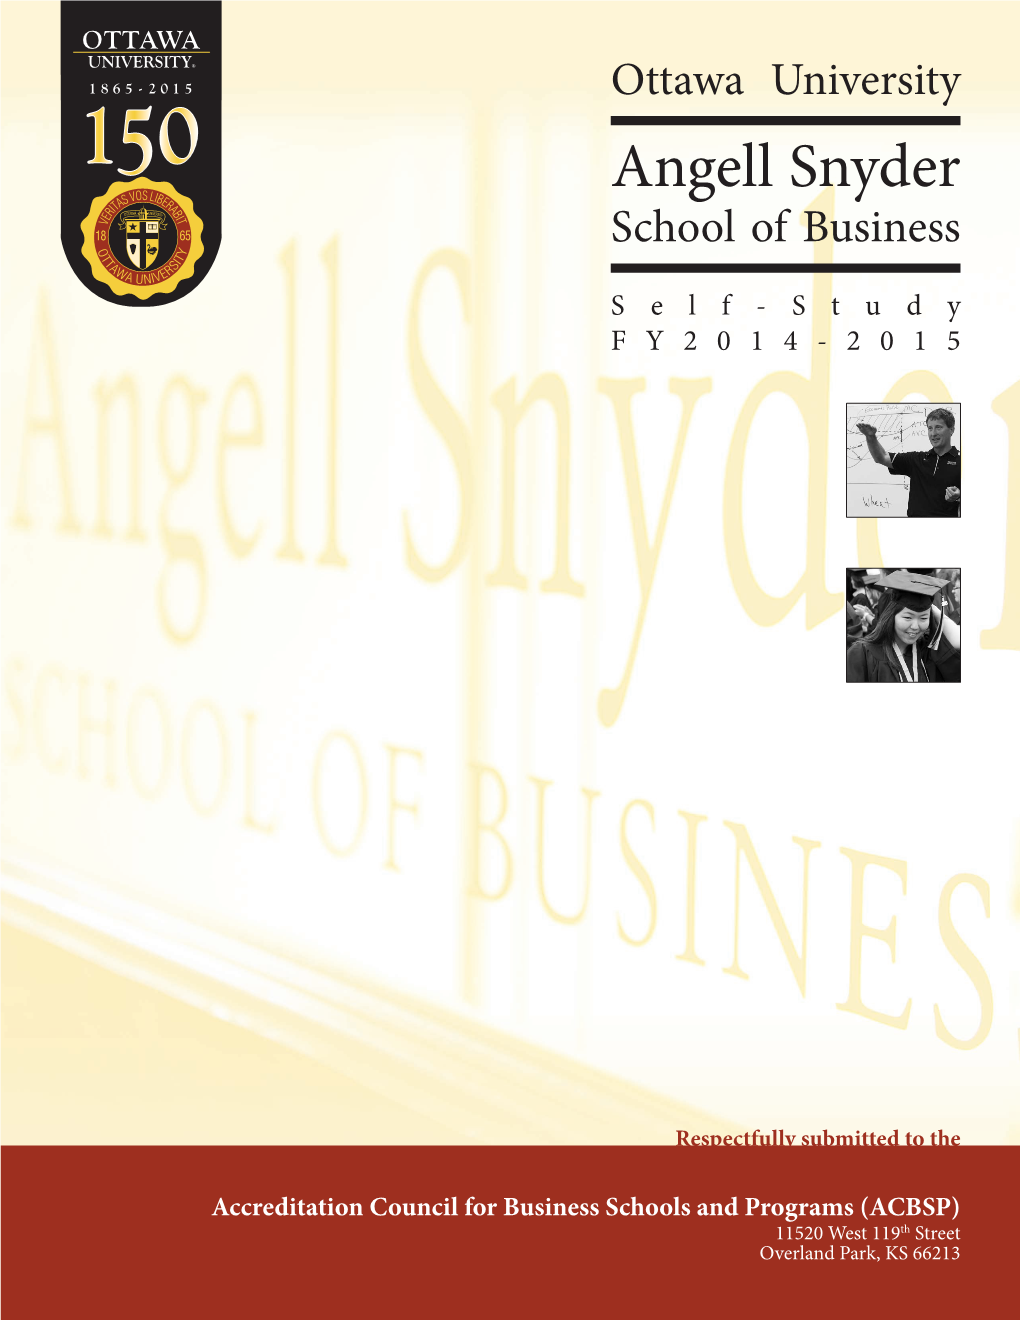 Angell Snyder School of Business